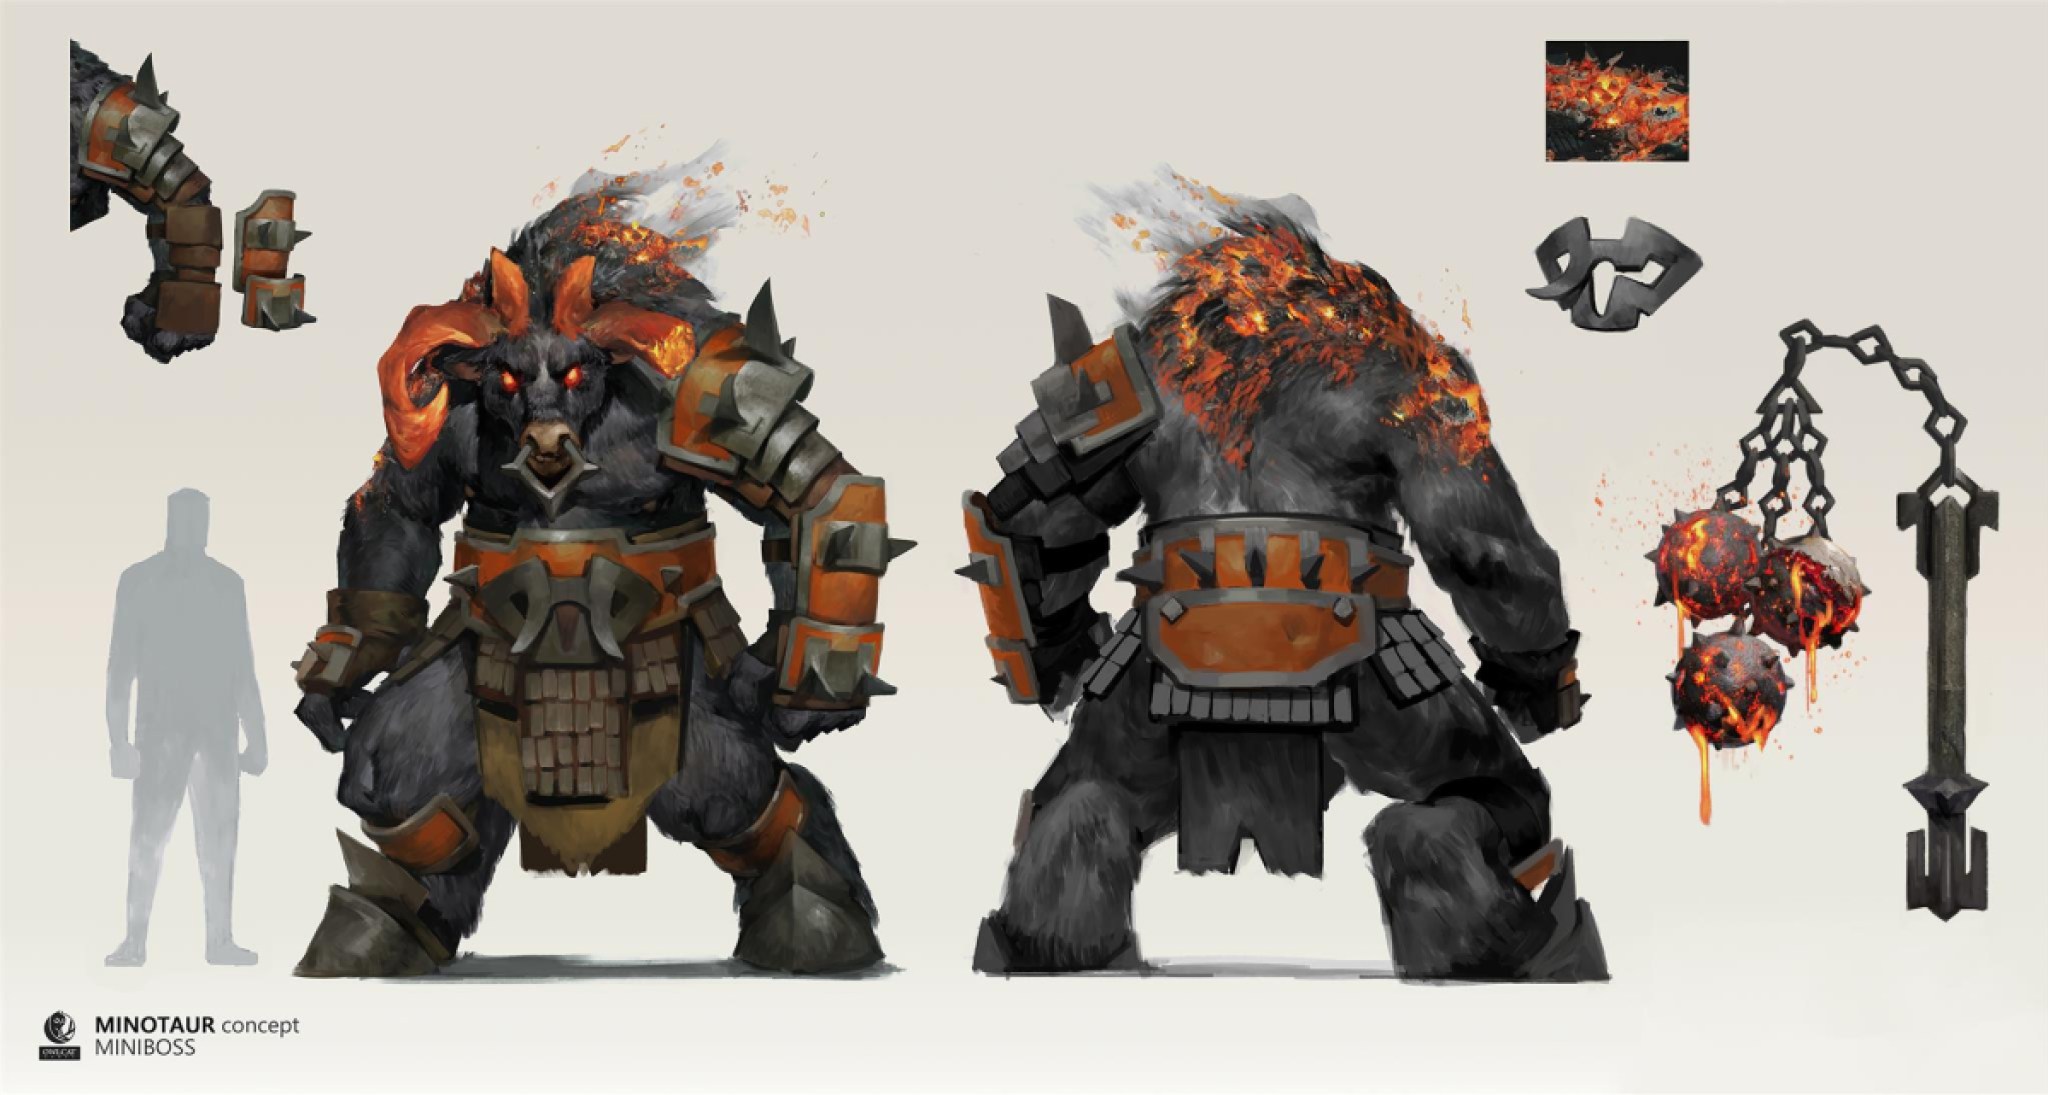 Concept art of a minotaur mini-boss in Pathfinder: Wrath of the Righteous